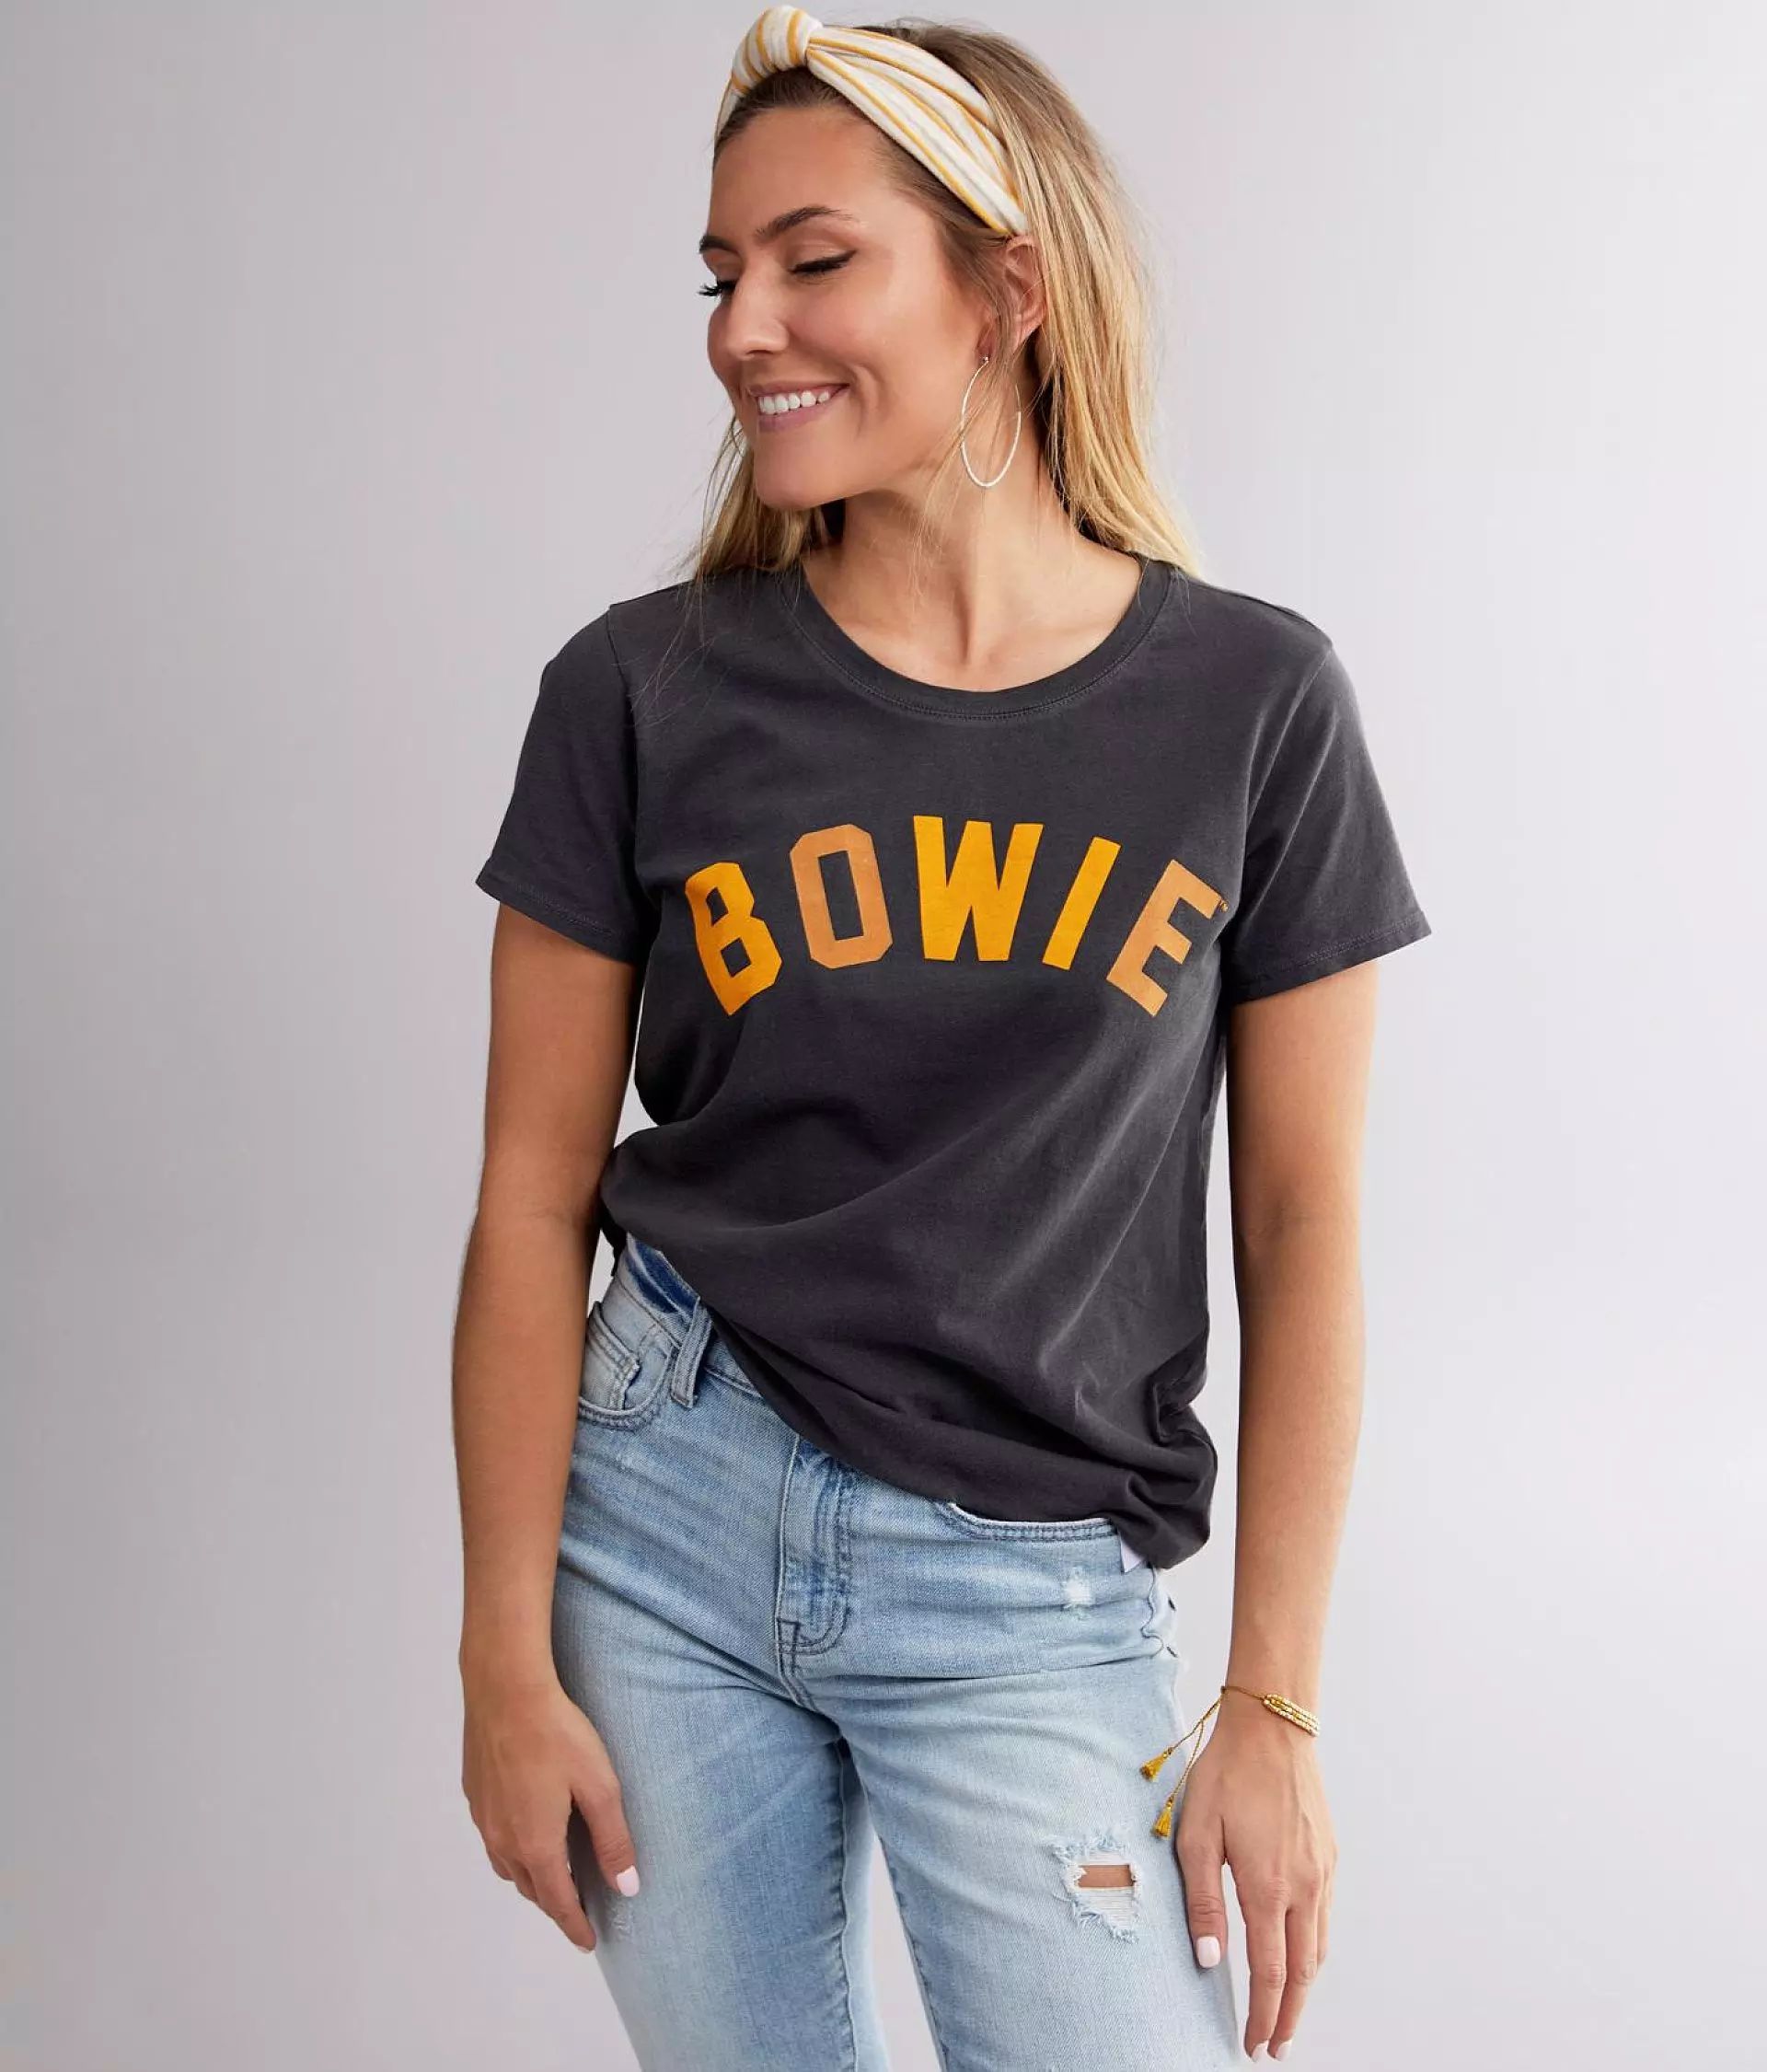 Bowie™ T-Shirt | Buckle